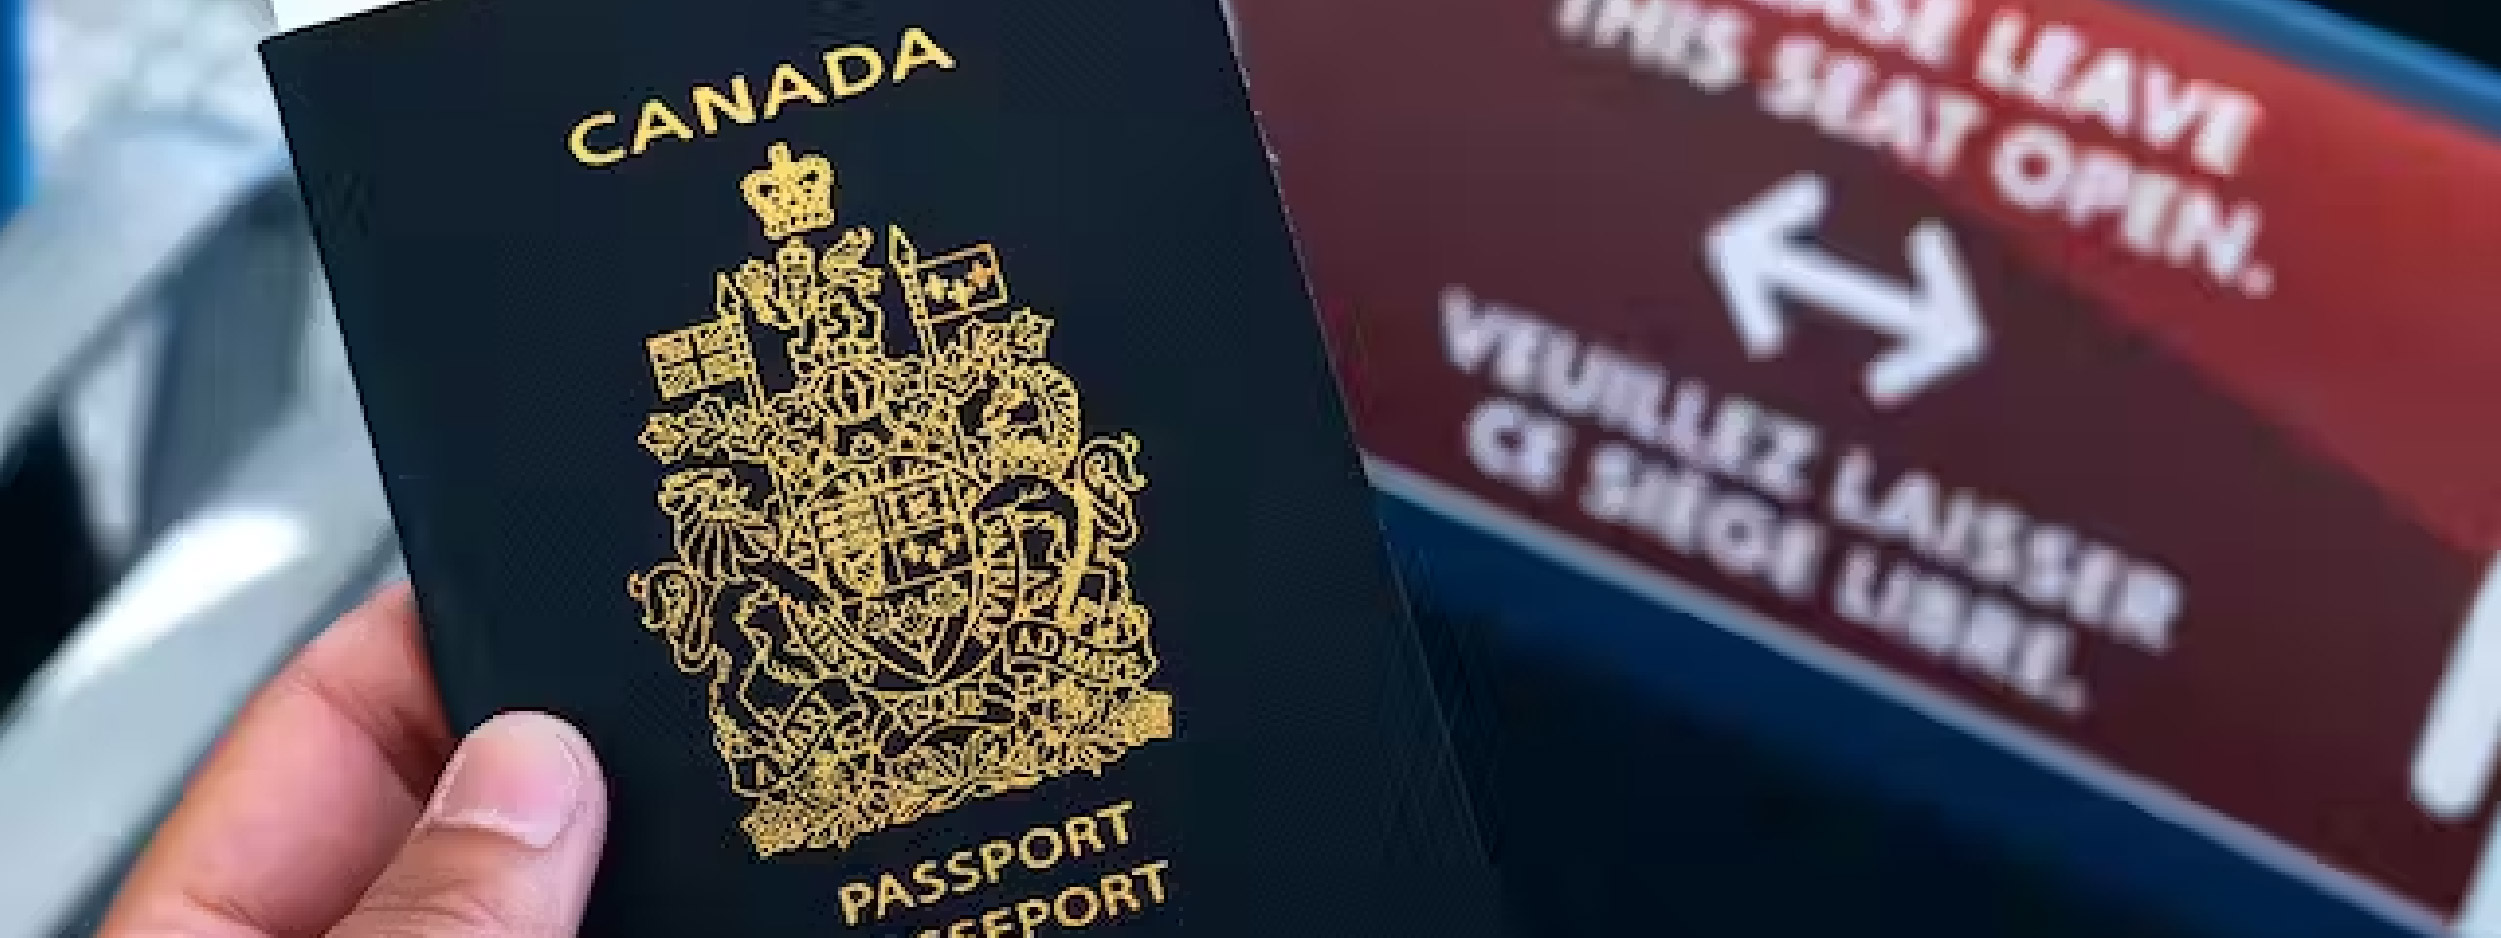 Image of a Canadian passport